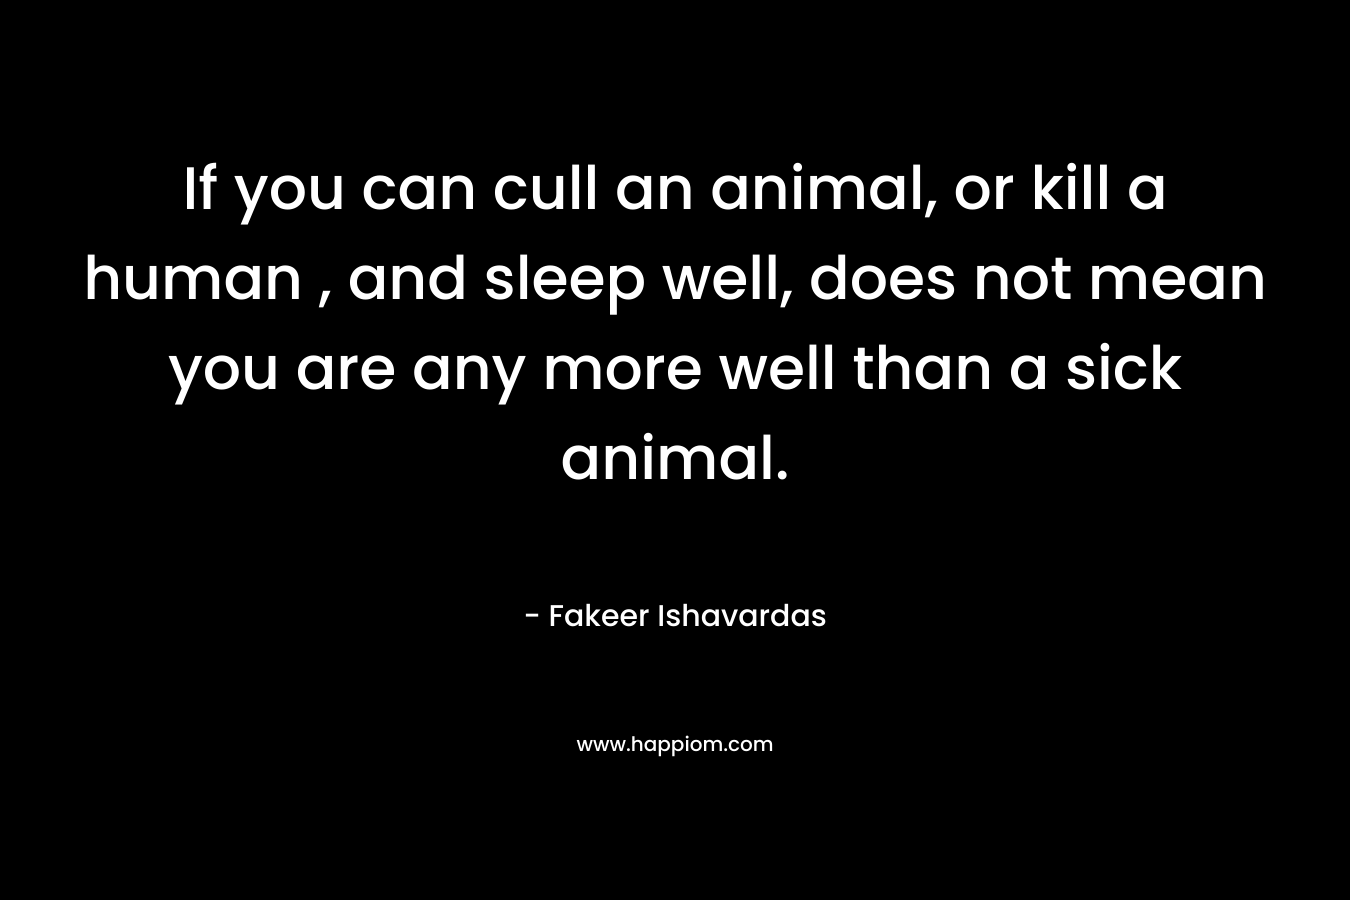 If you can cull an animal, or kill a human , and sleep well, does not mean you are any more well than a sick animal.